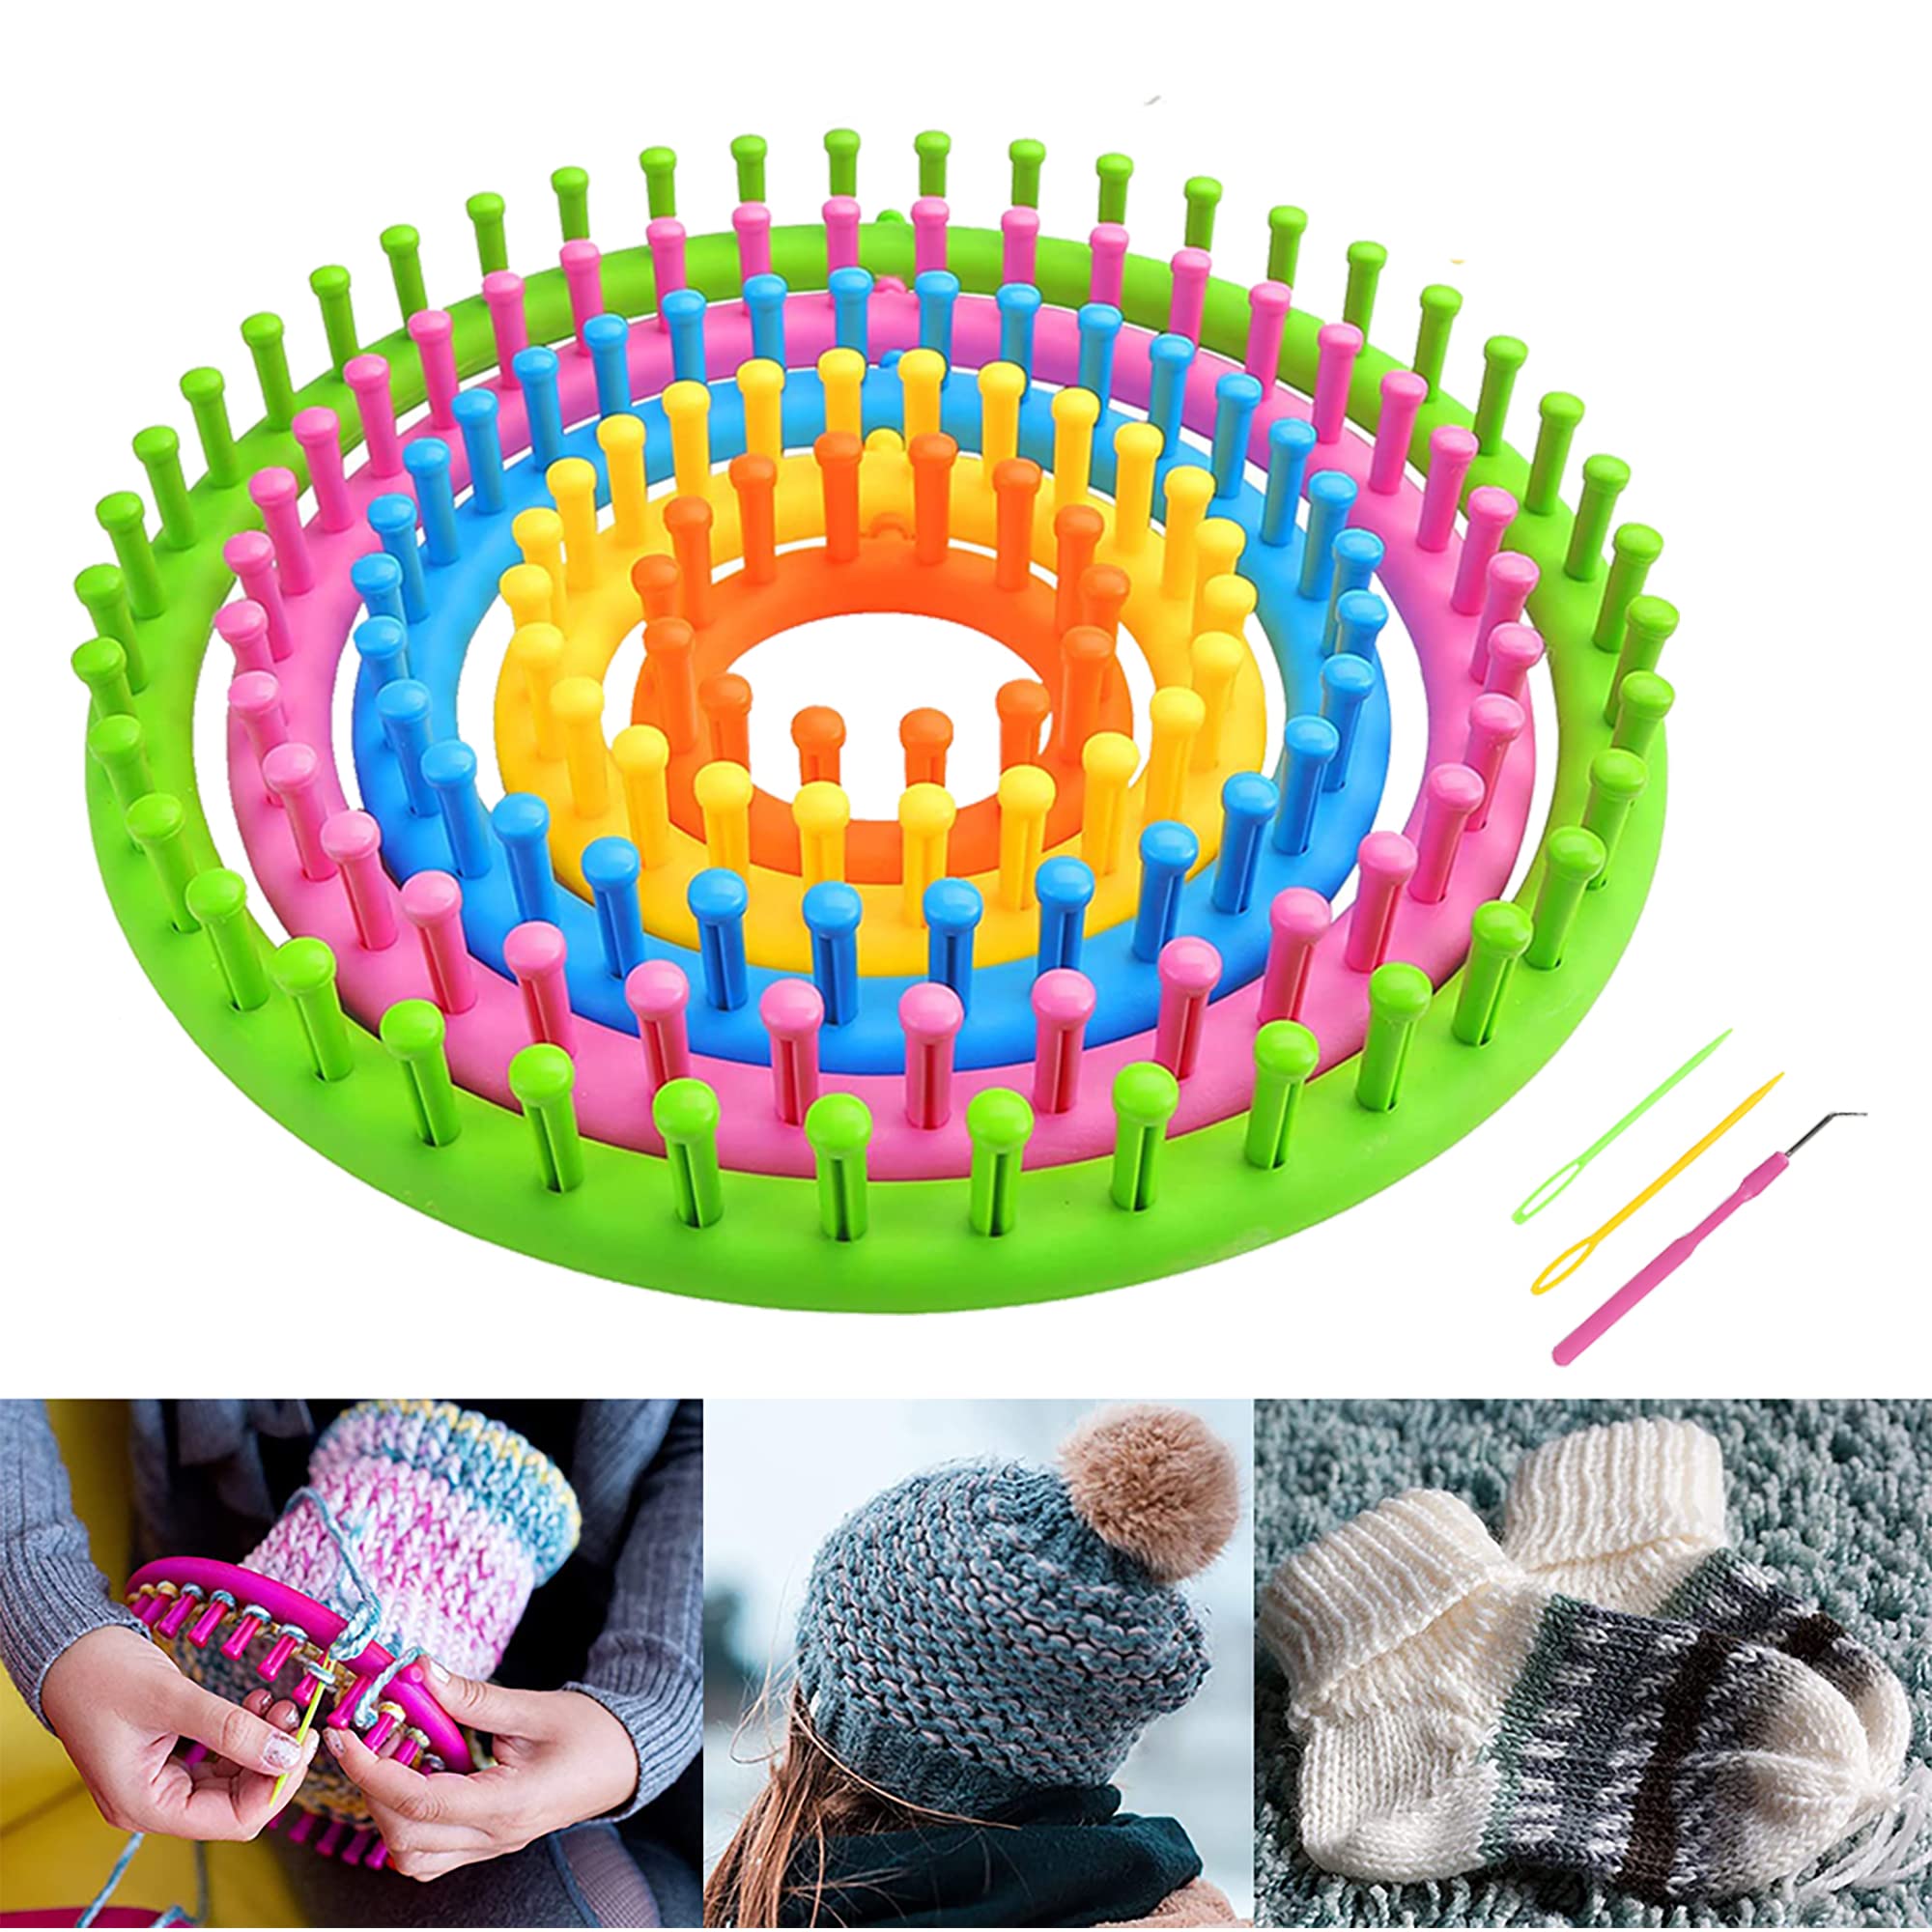 Wayion Round Knitting Loom Plastic Hat Weaving Looms Kit with Loom Hook/Needle Creativity for Kids Small Knitting Loom Kit - Perfect for Sock Hat